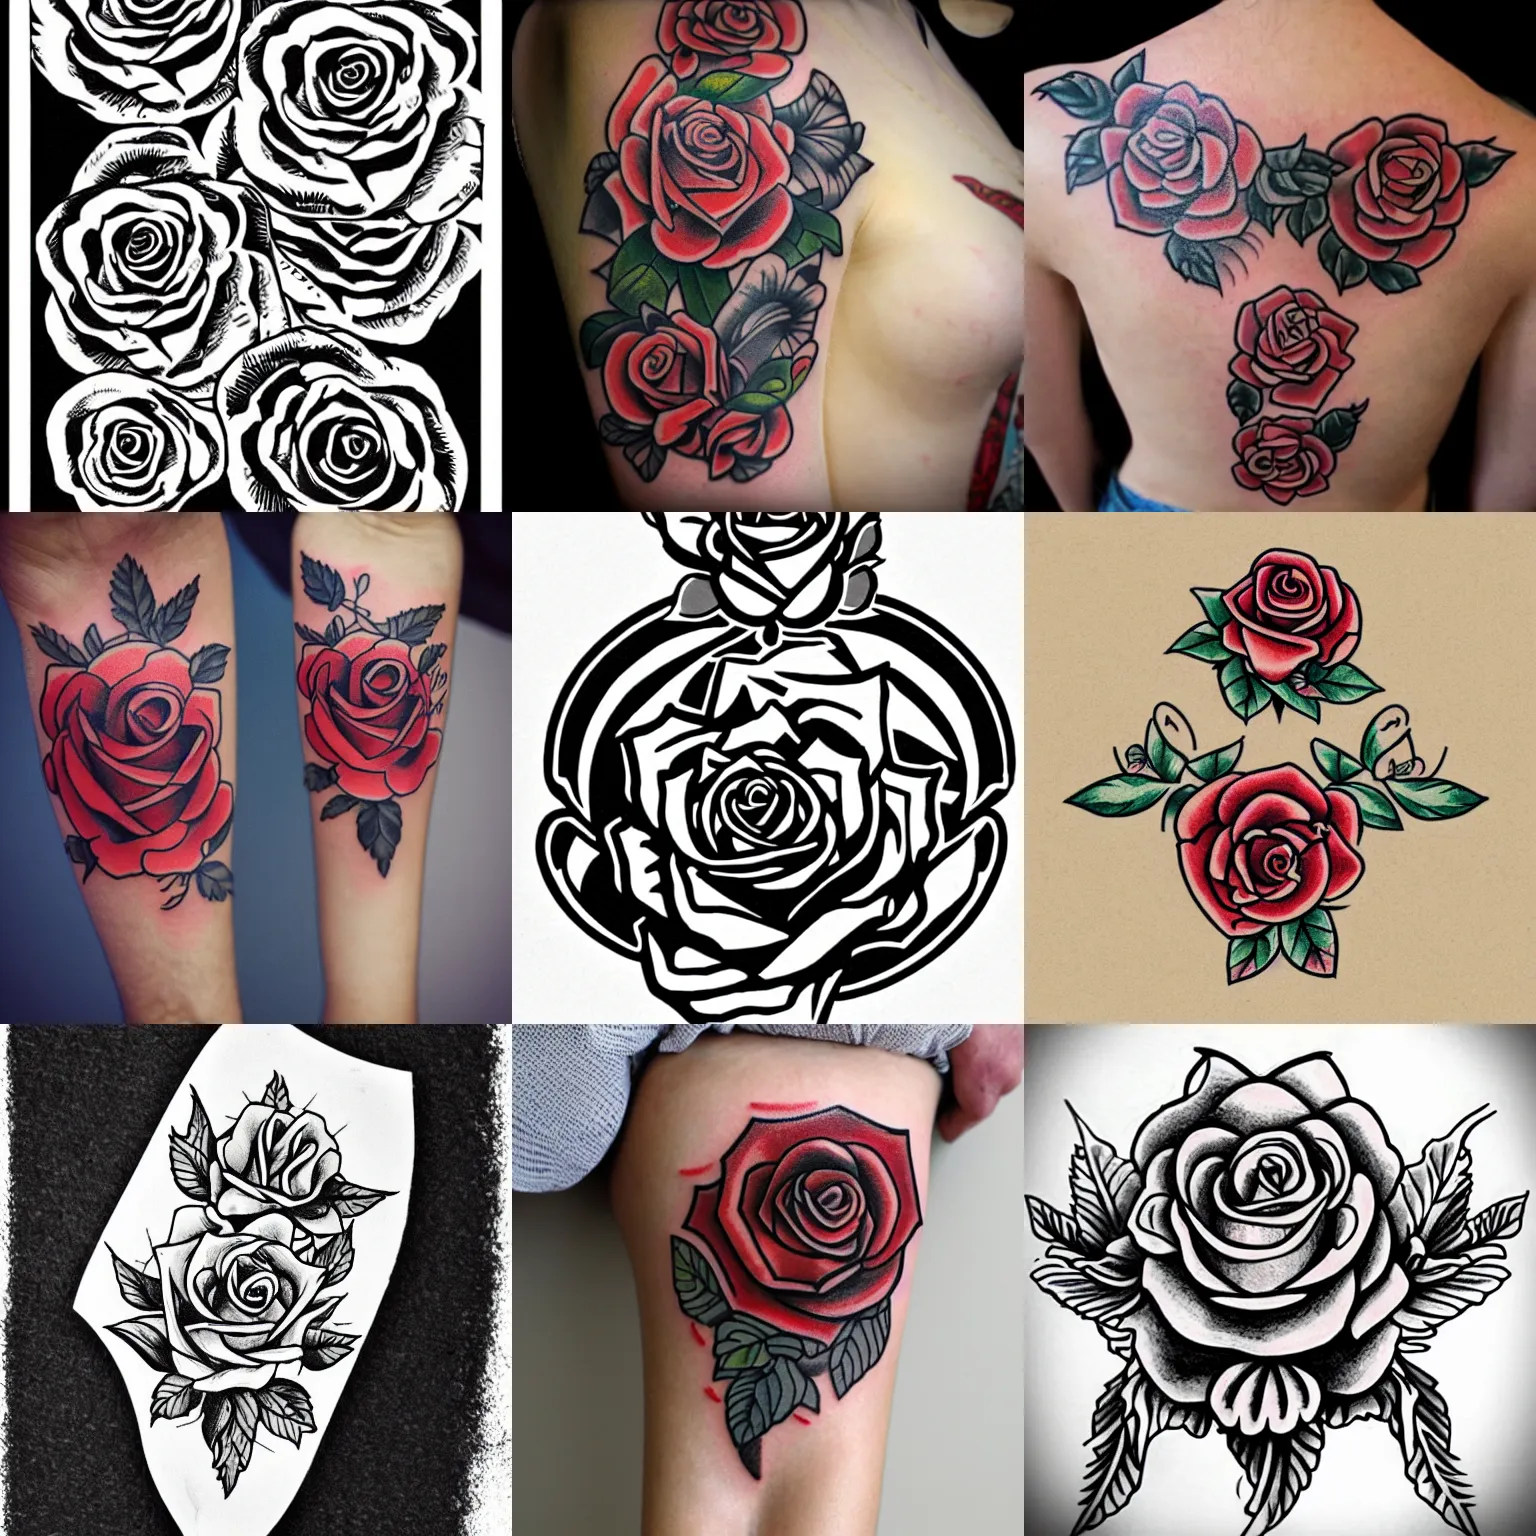 rose tattoo, temporary tattoo, sailor jerry tattoo | Stable Diffusion ...